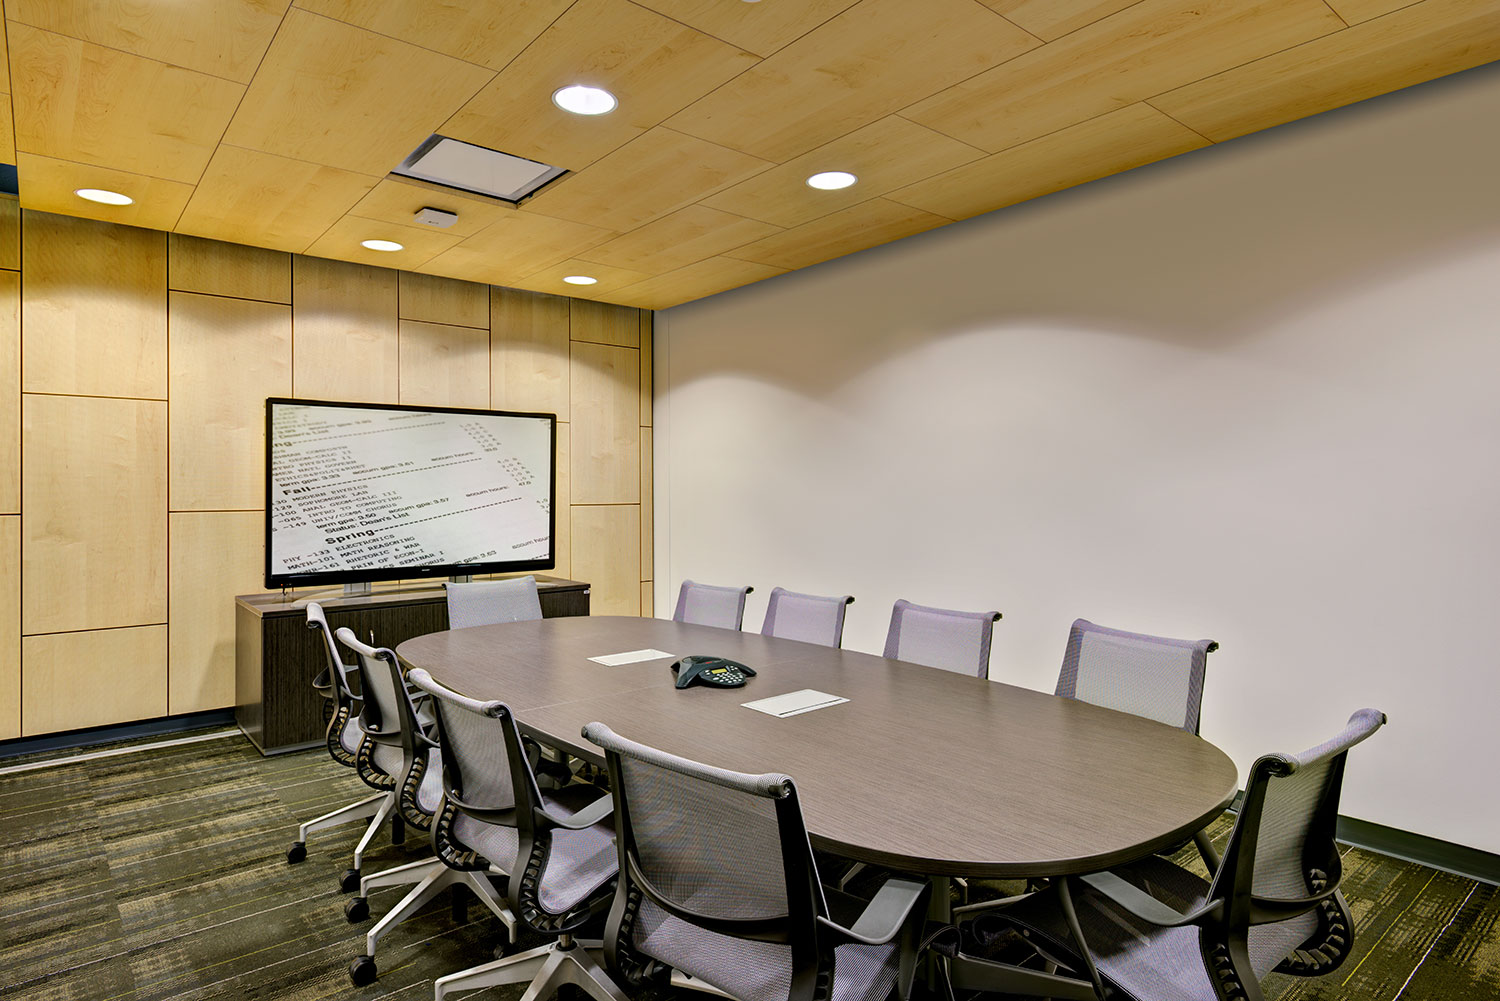 Conference room at Mosaic Associates College Science Center design for Hudson Valley Community College in Troy, New York.